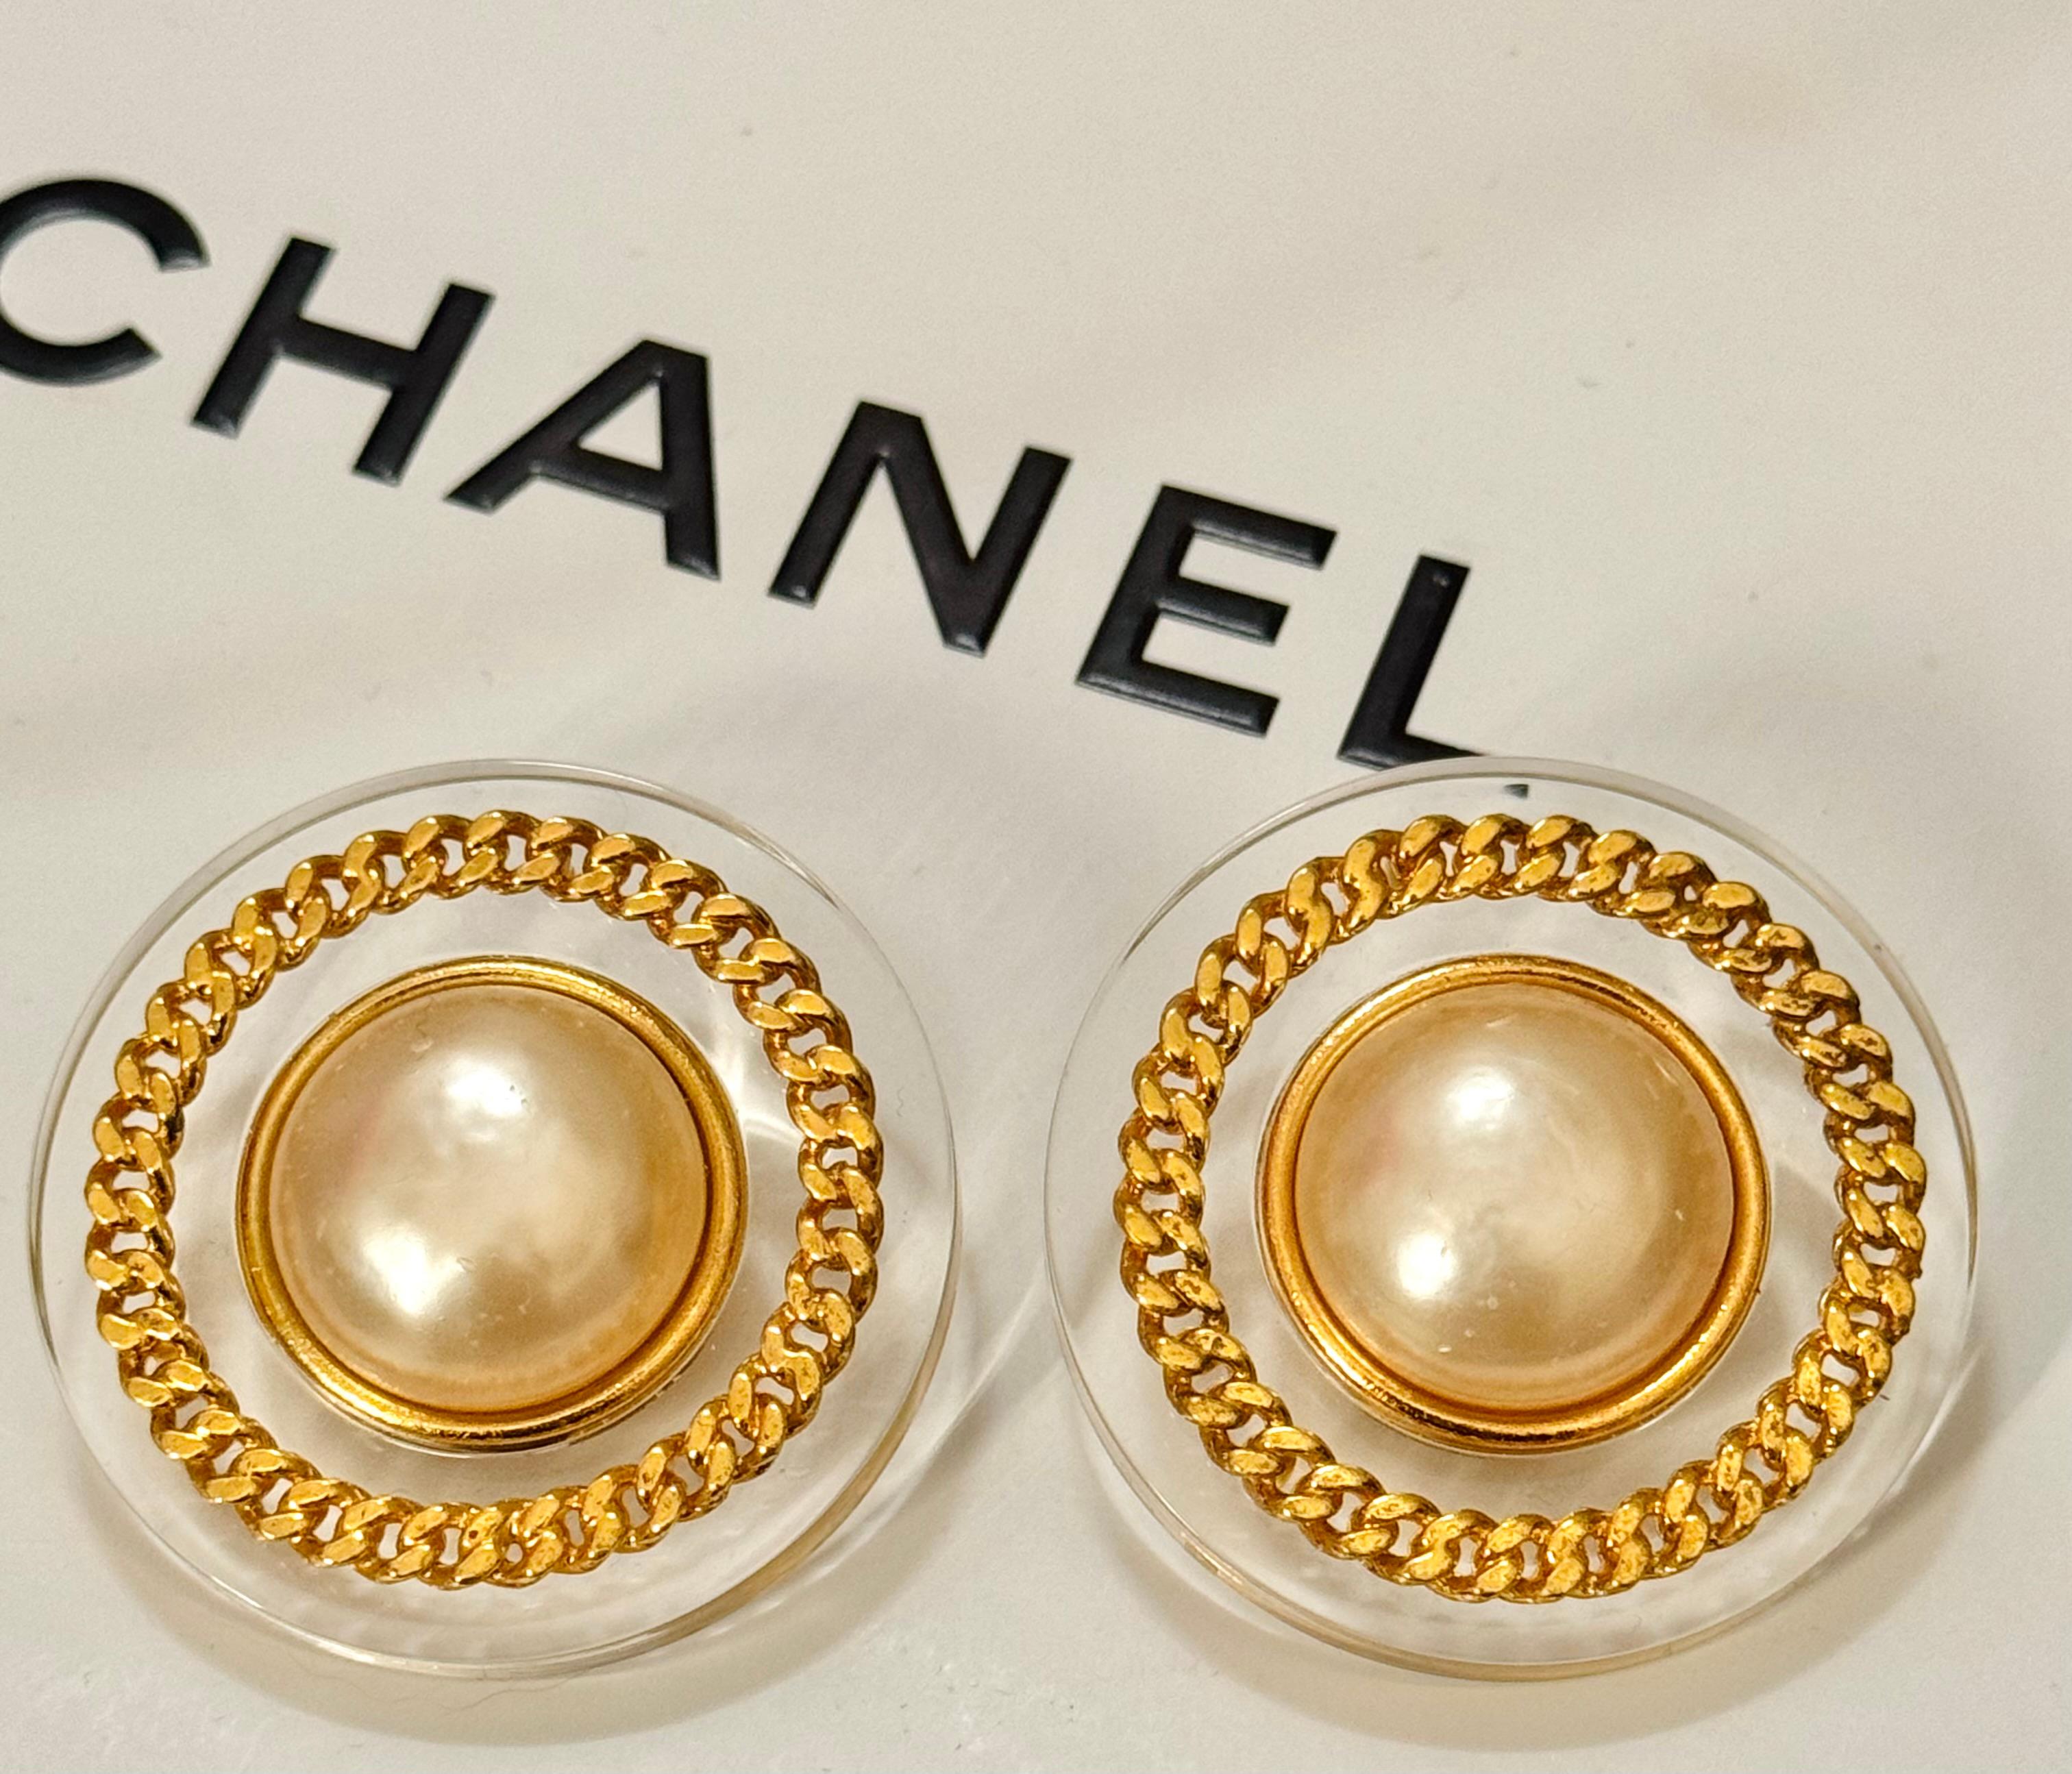 Chanel 1992 (Season 28 by Victoire de Castellane) large Gripoix glass pearl and lucite 24k gold plated clip on earrings, 1.6 x 1.6 inches, very good condition 